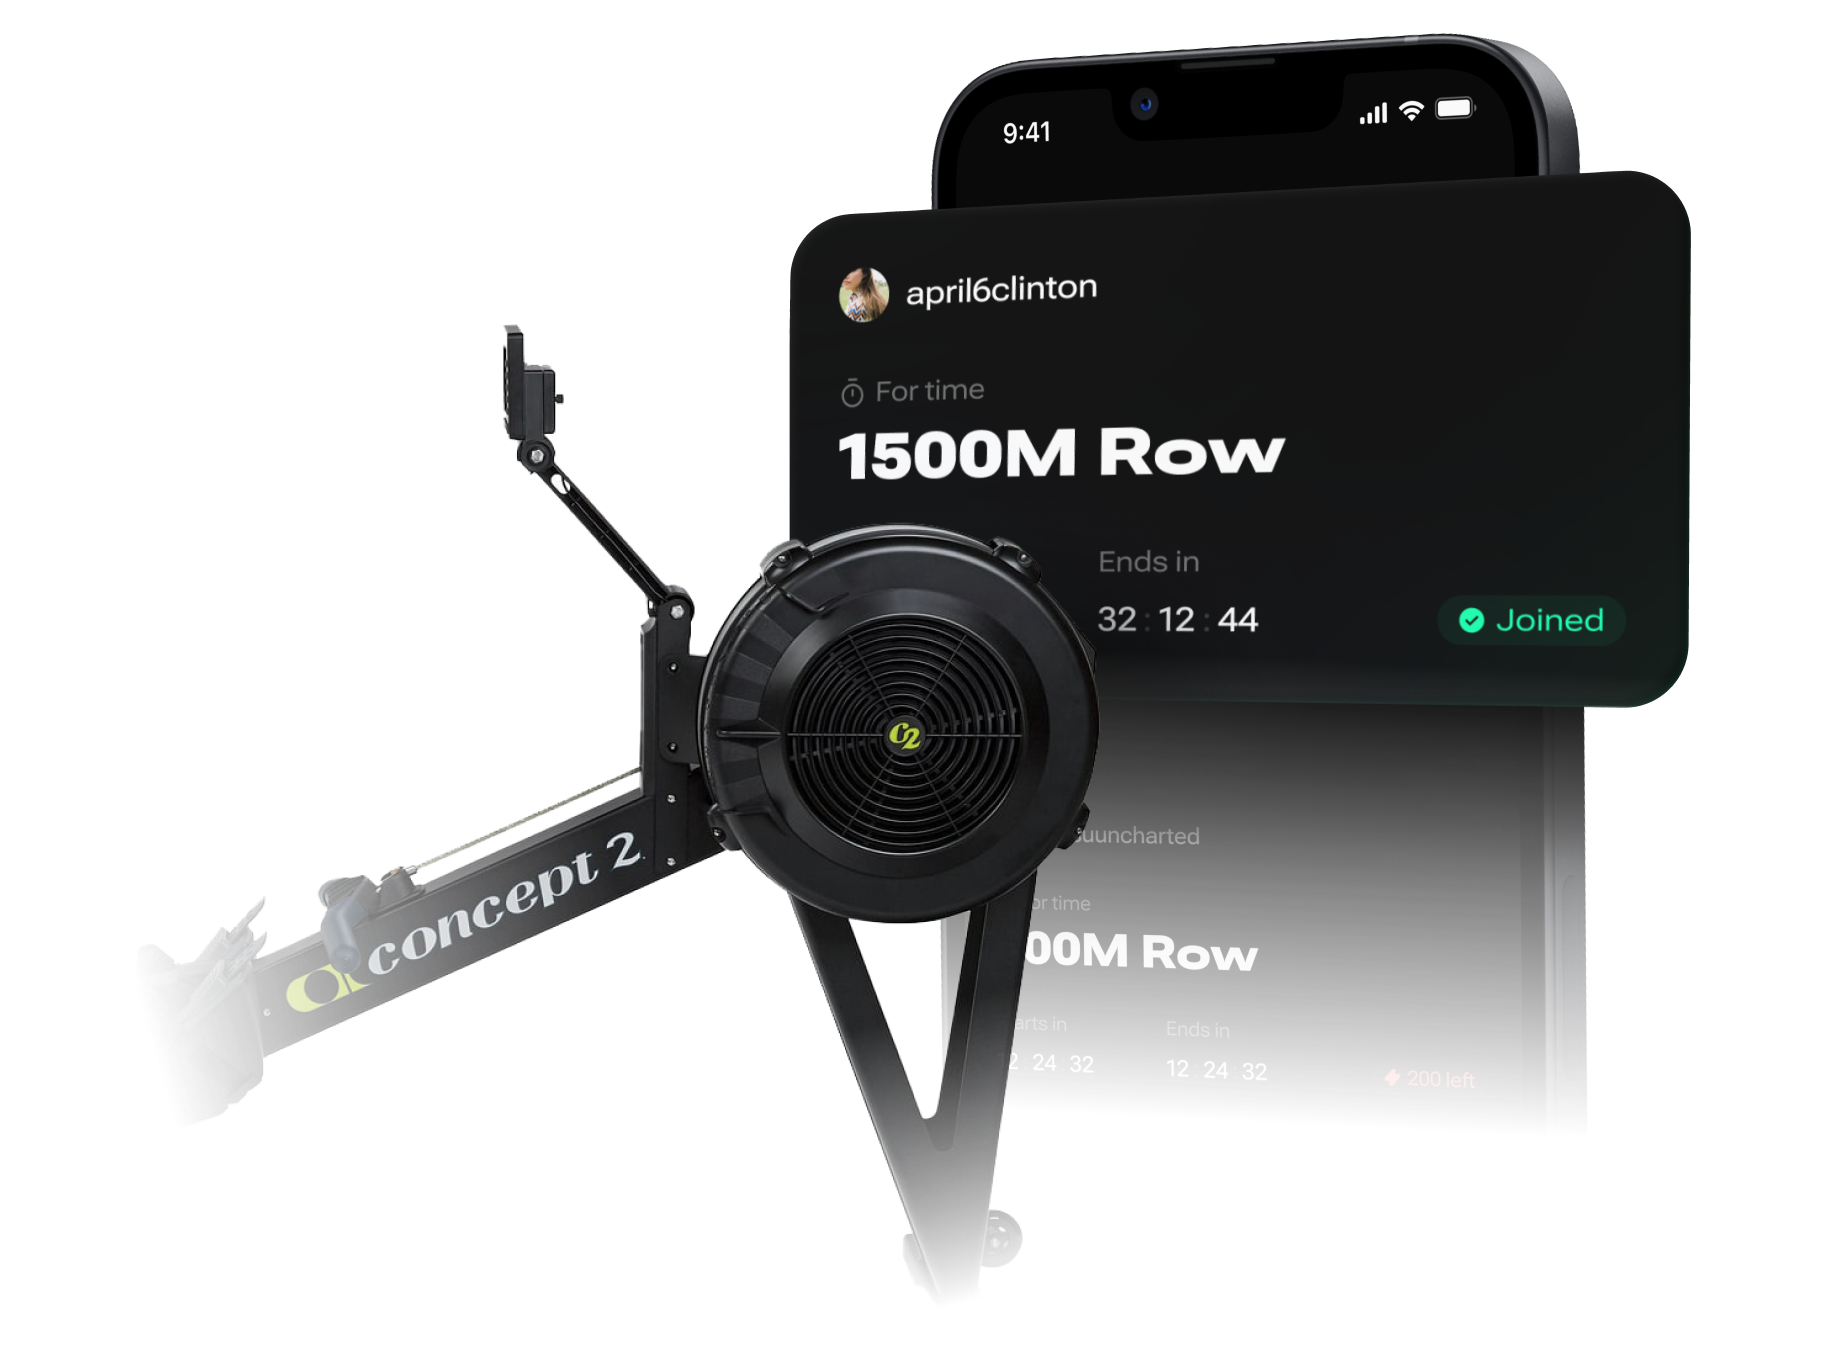 image of concept 2 rower and gym wallet mobile app next to it